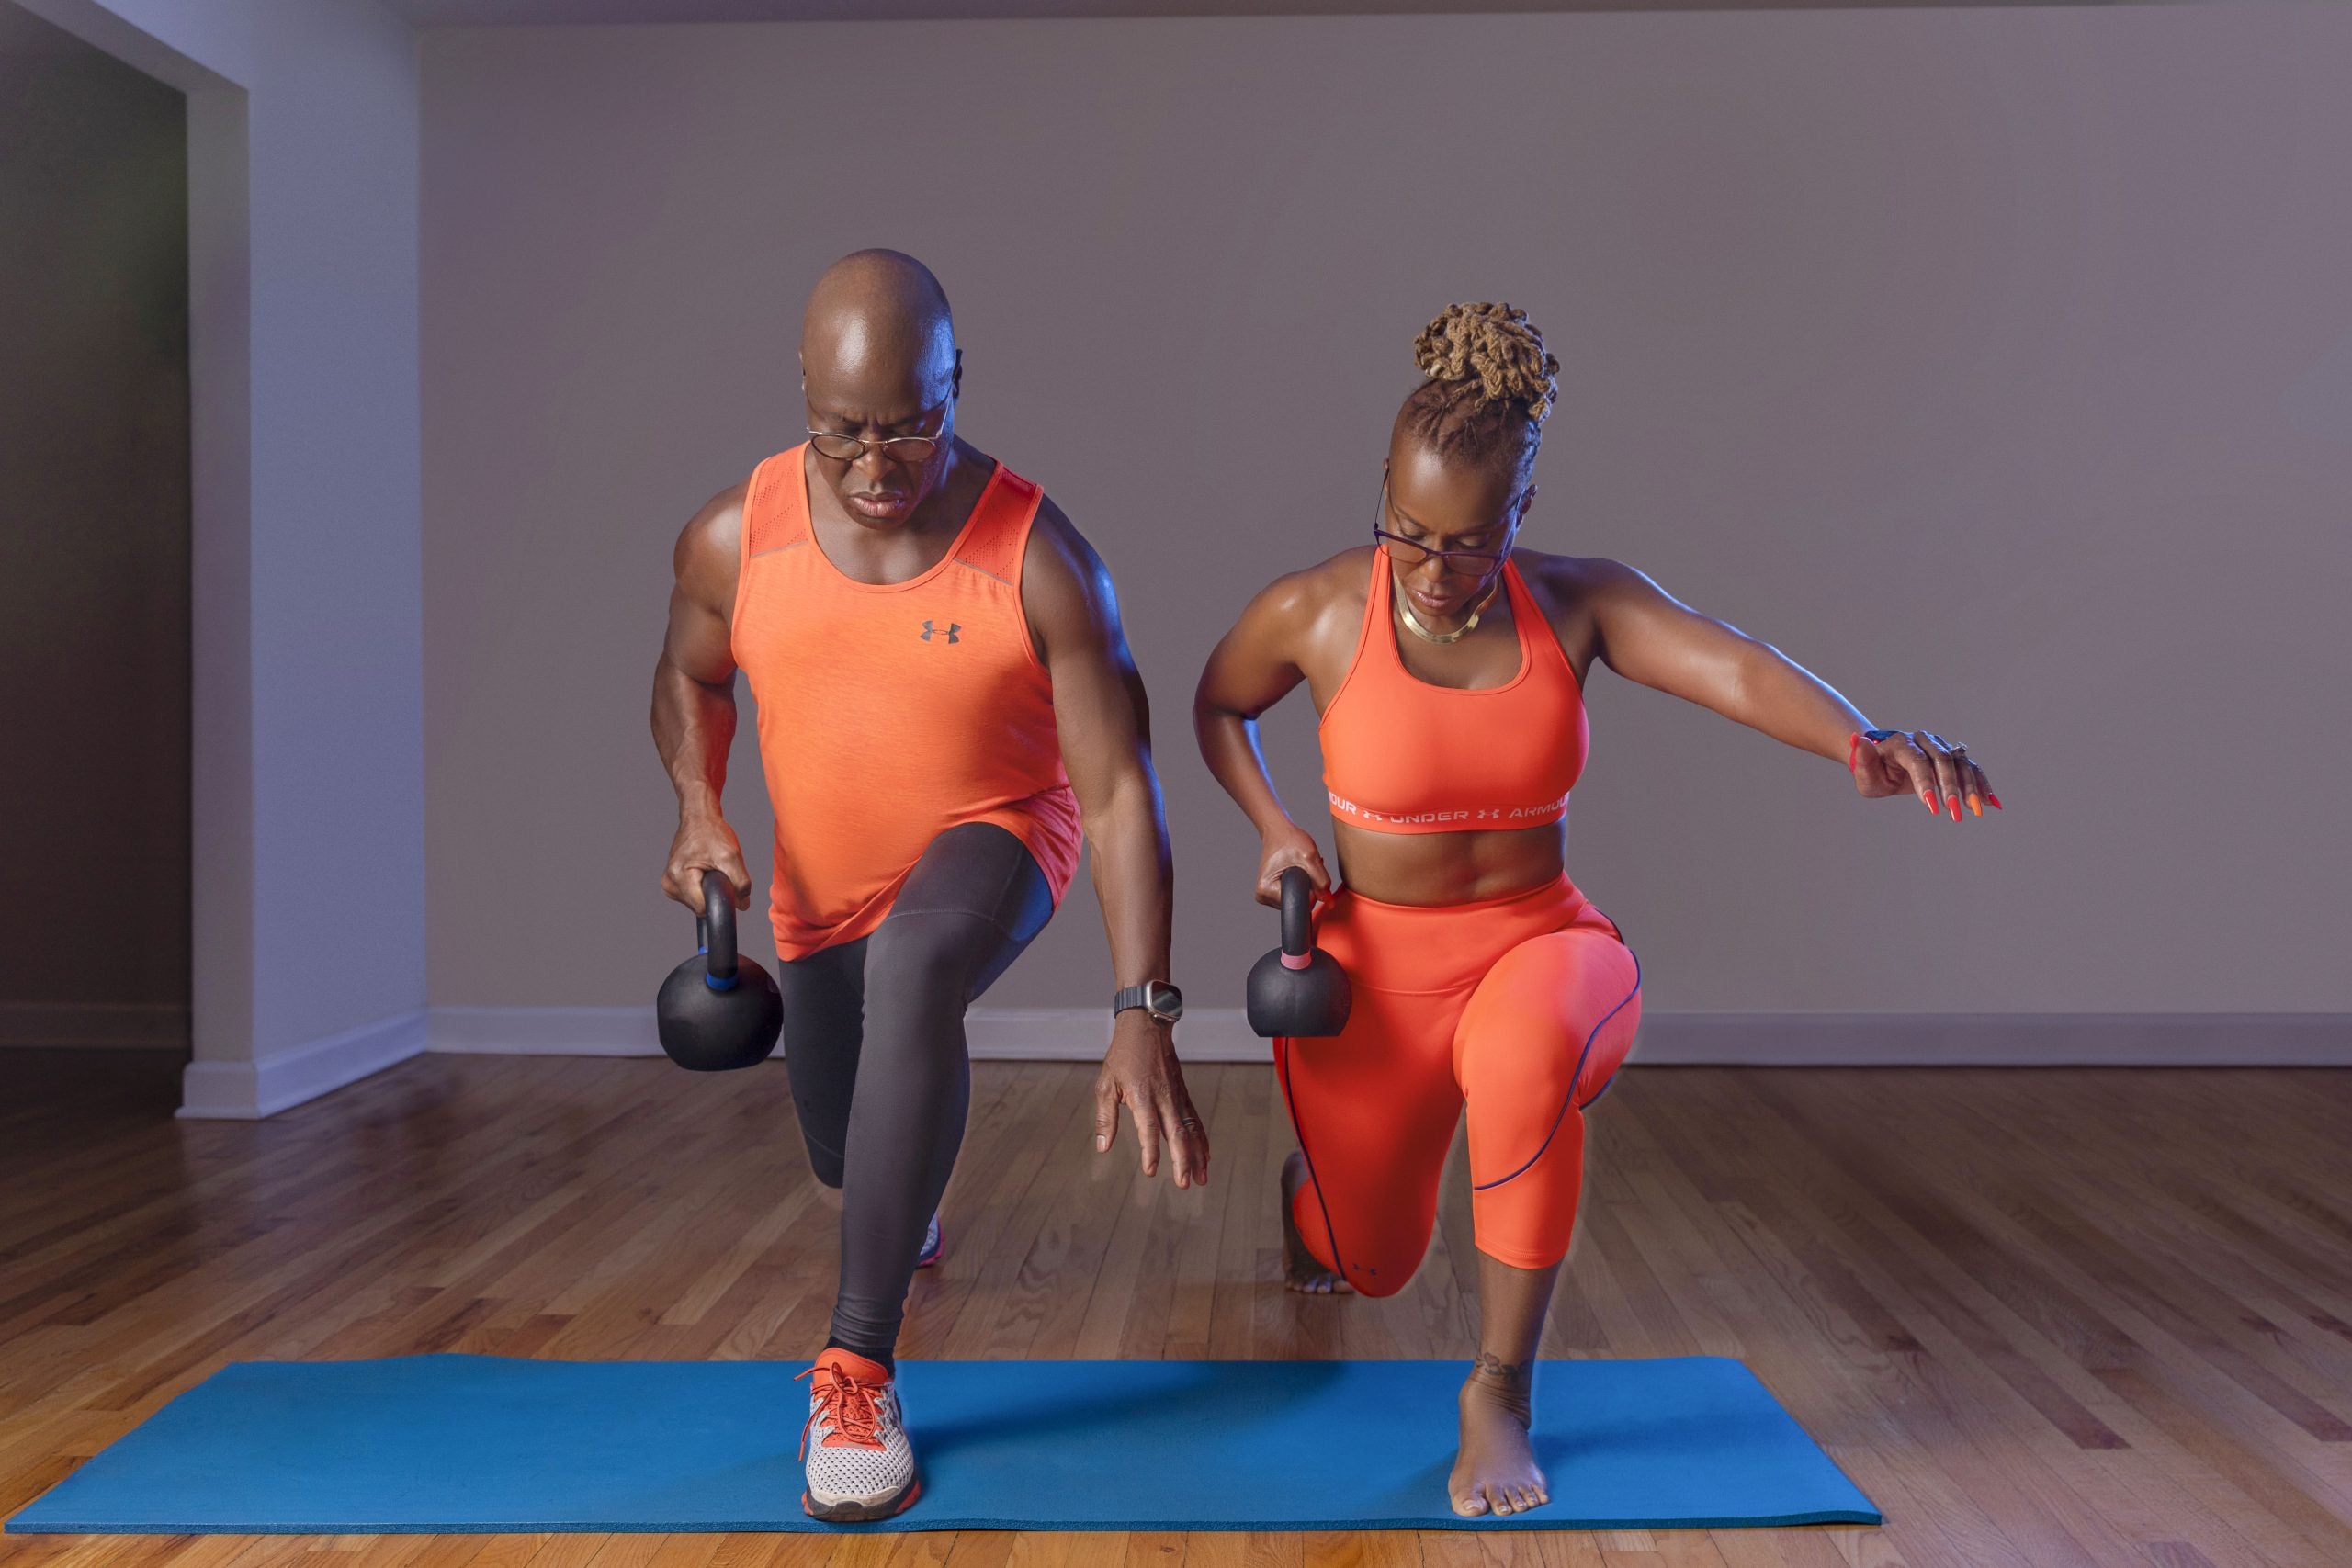 Working Out Together Helped This Couple Transform Their Health — And Strengthen Their Bond